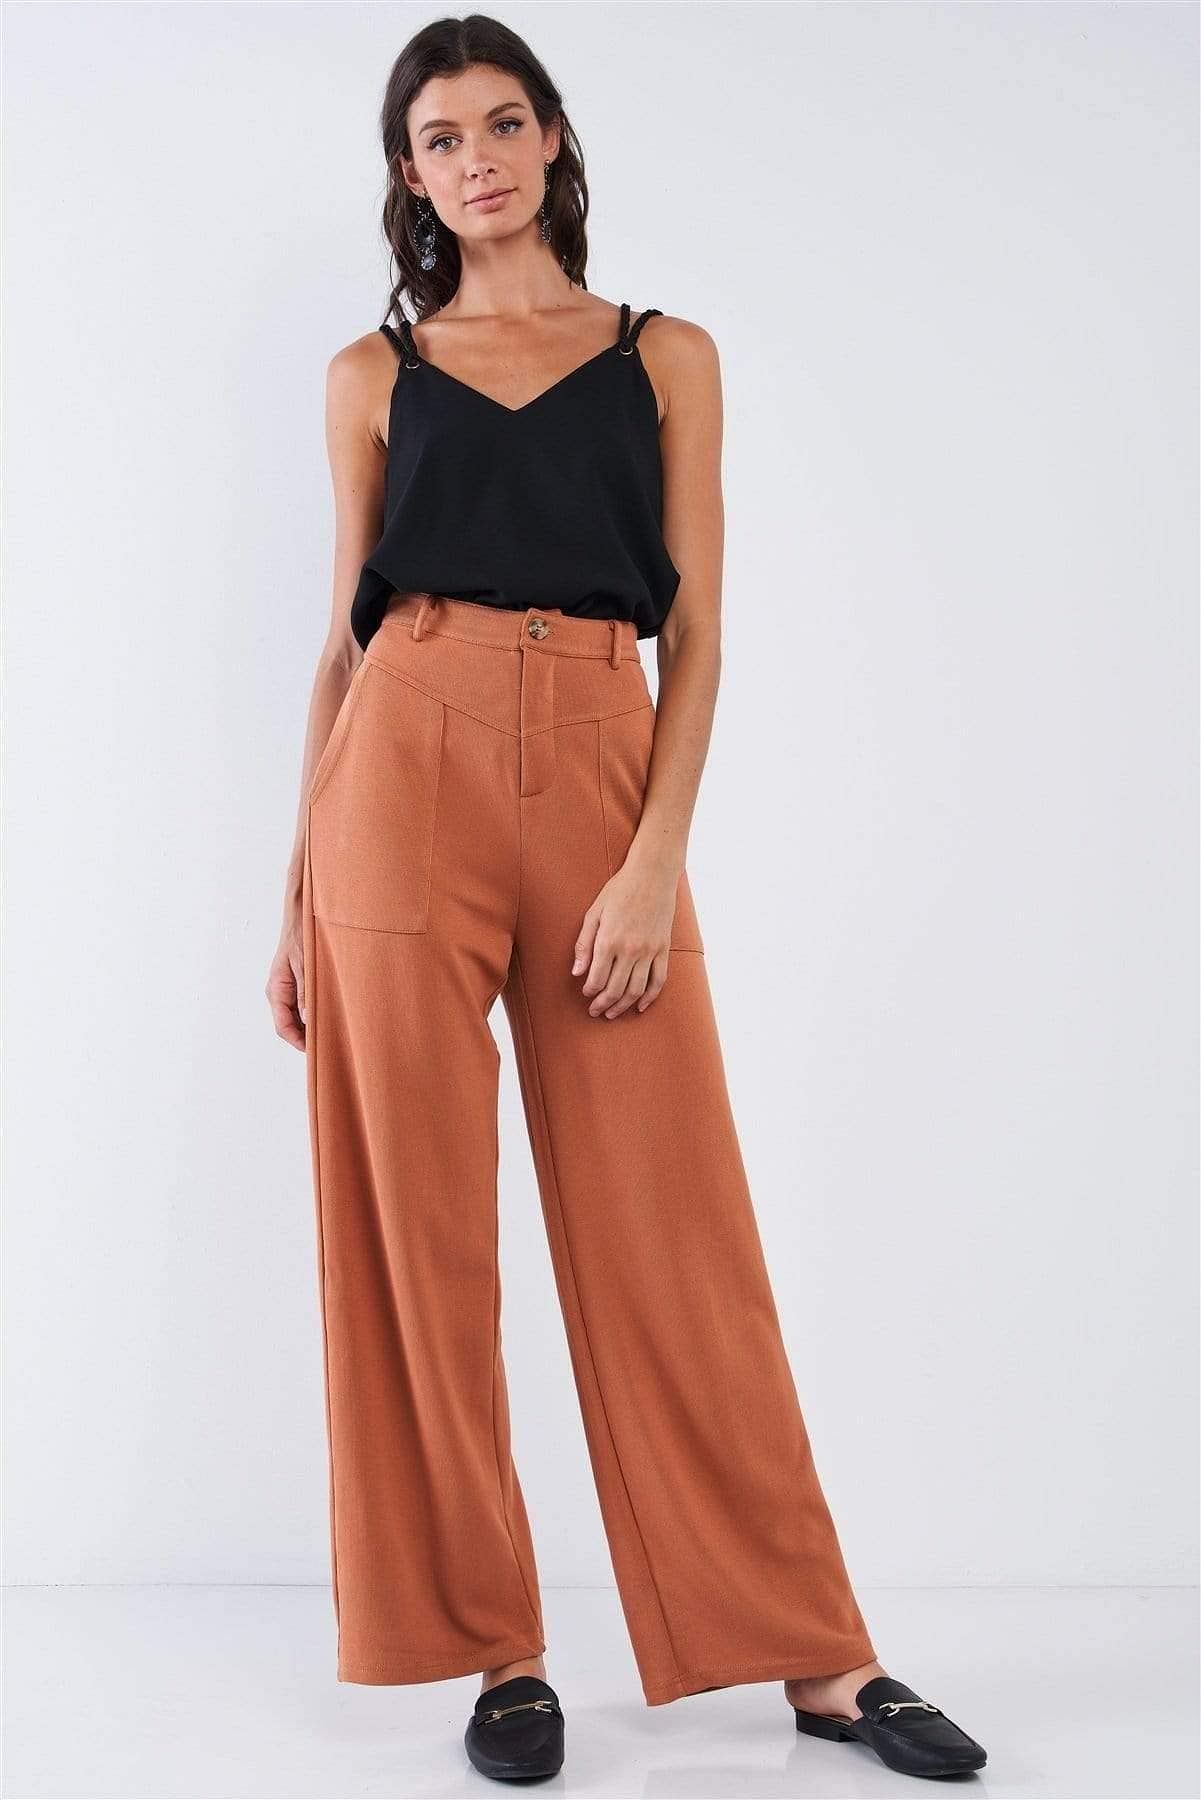 Orange High Waisted Wide Leg Pants - Shopping Therapy, LLC 